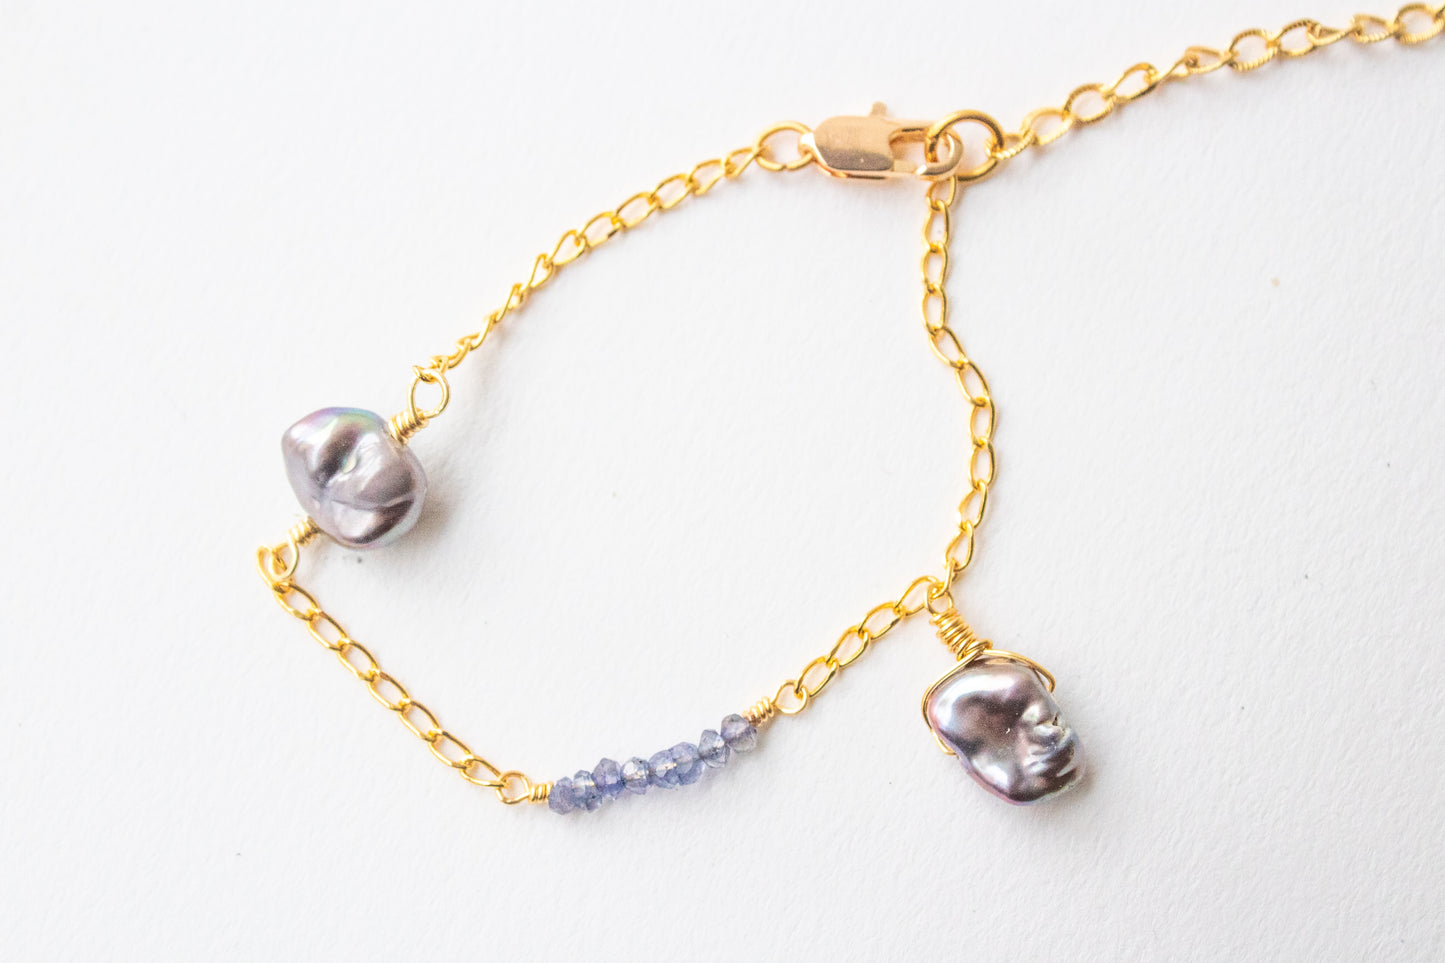 Itayetzi. Bracelet with iolite and gray pearl